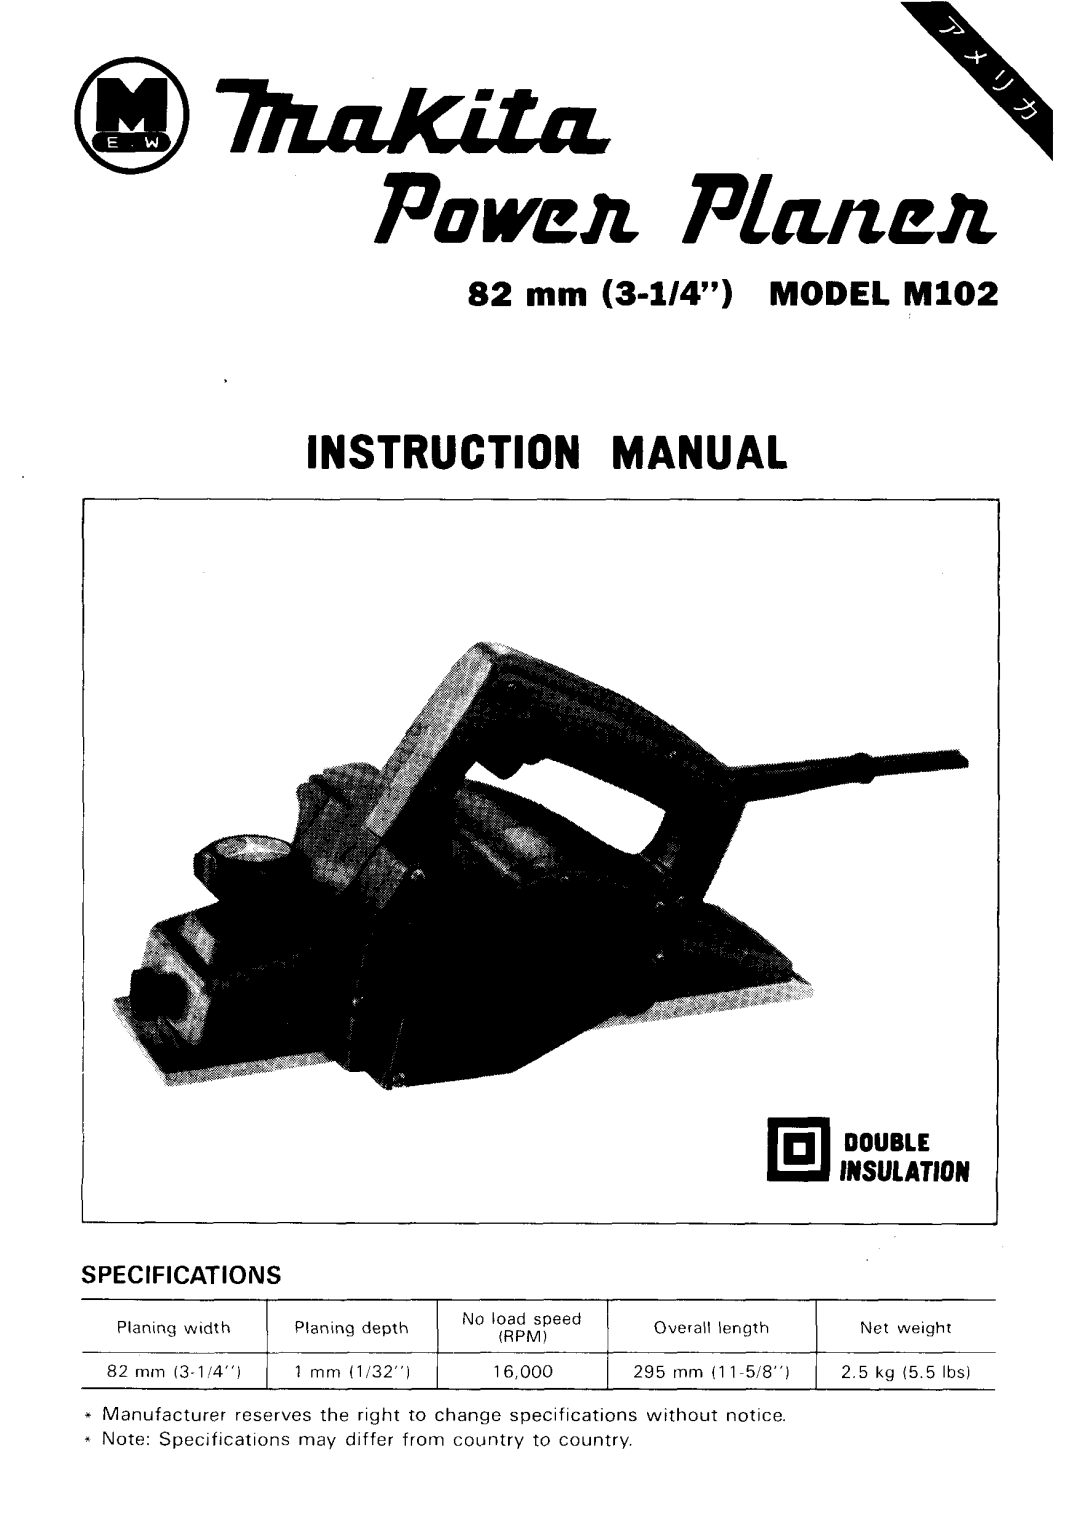 Makita M102 instruction manual Instruction Manual, 82 mm 3-1/4 MODEL Mi02, Double, Specifications, Insulation, 8 2 m m 